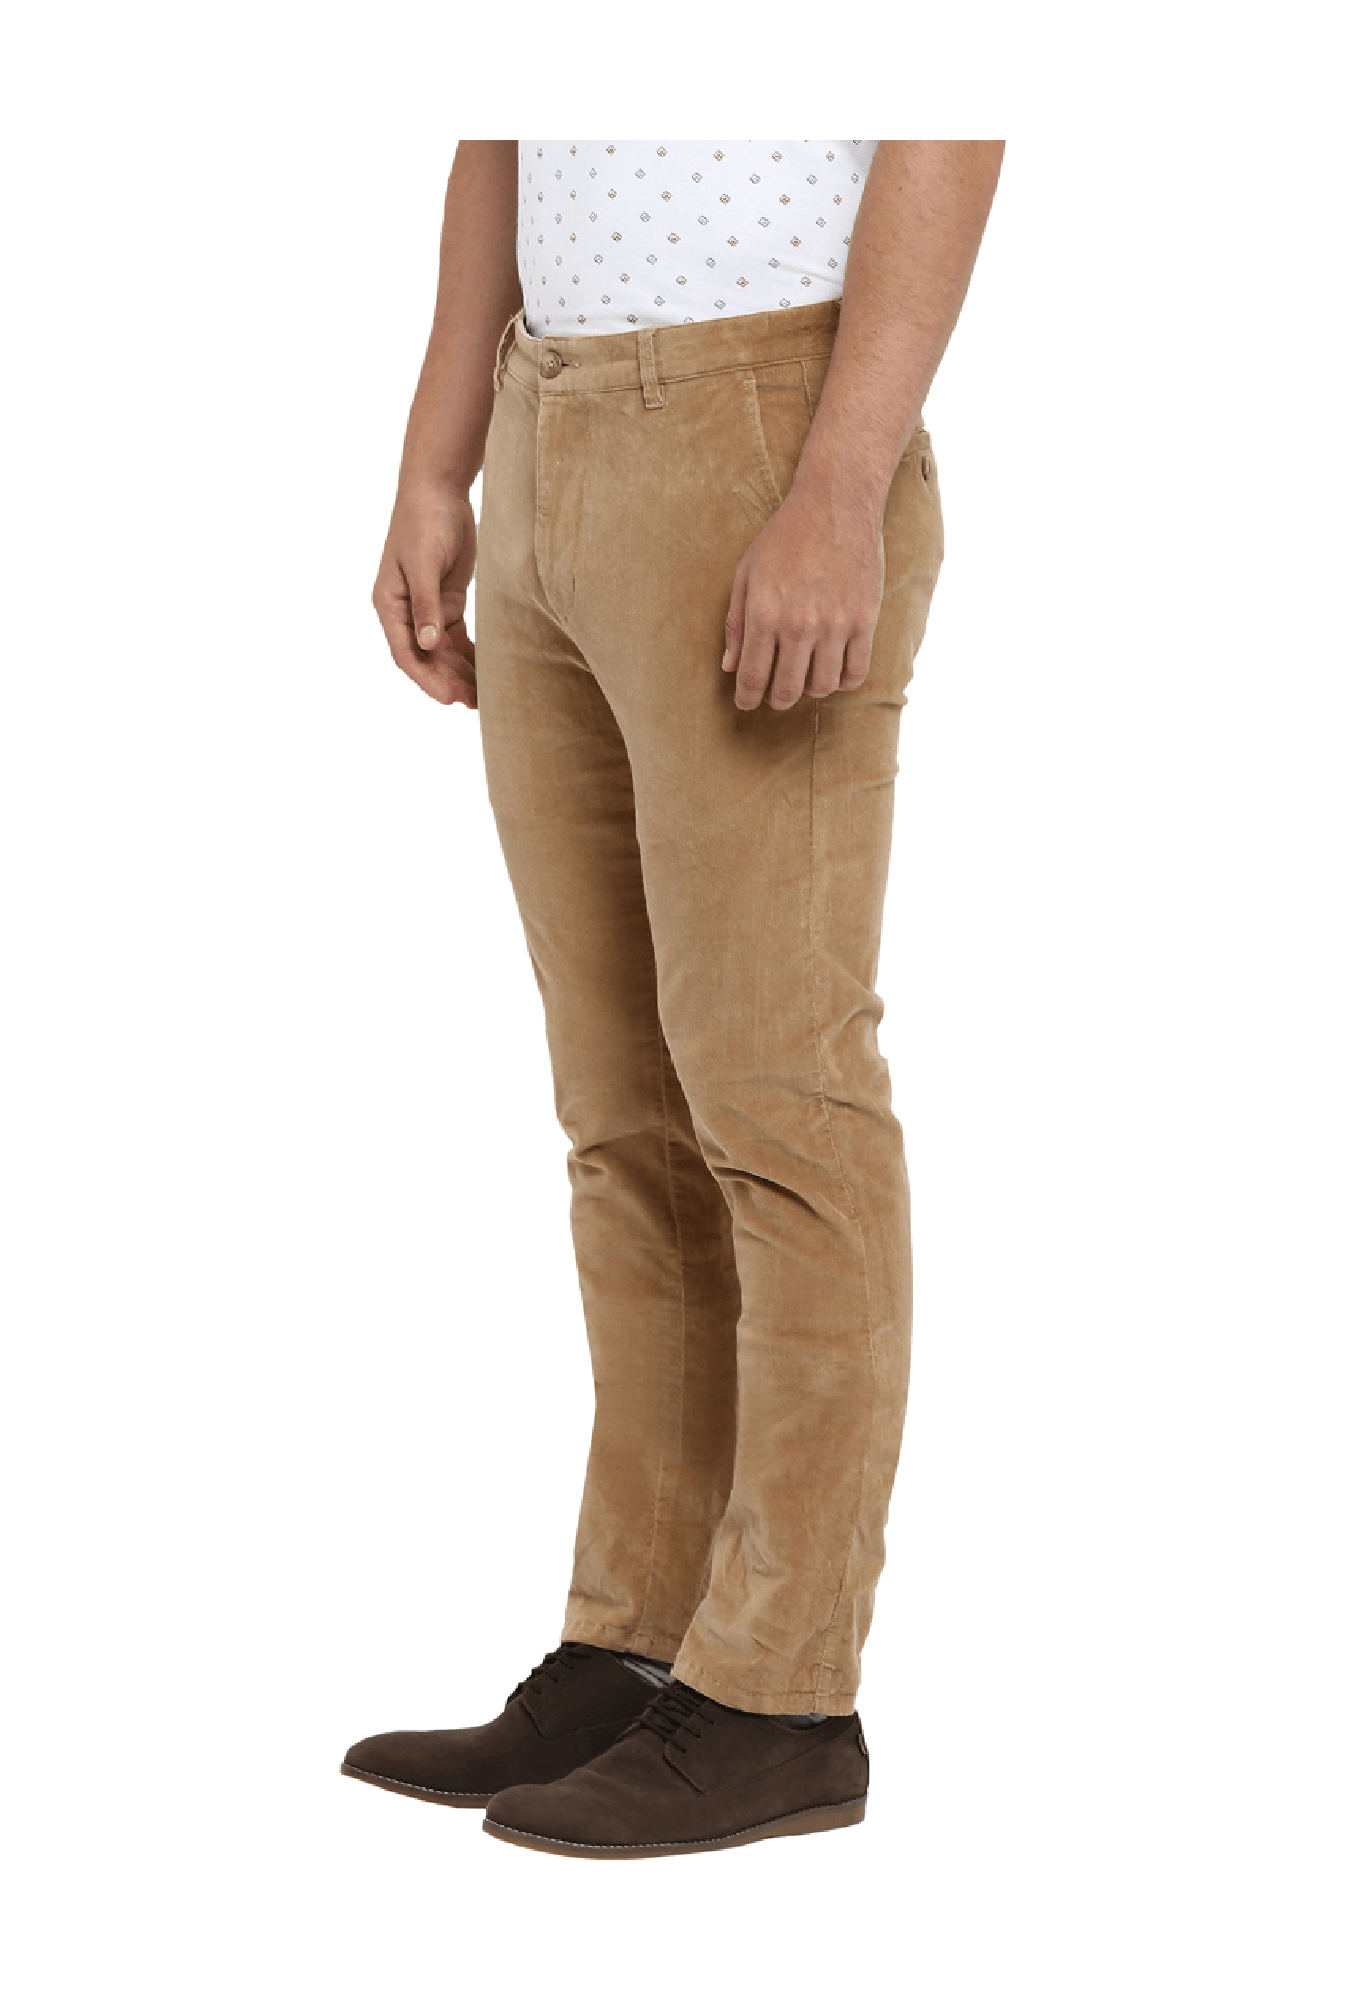 Parx Casual Trousers  Buy Parx Black Trousers Online  Nykaa Fashion